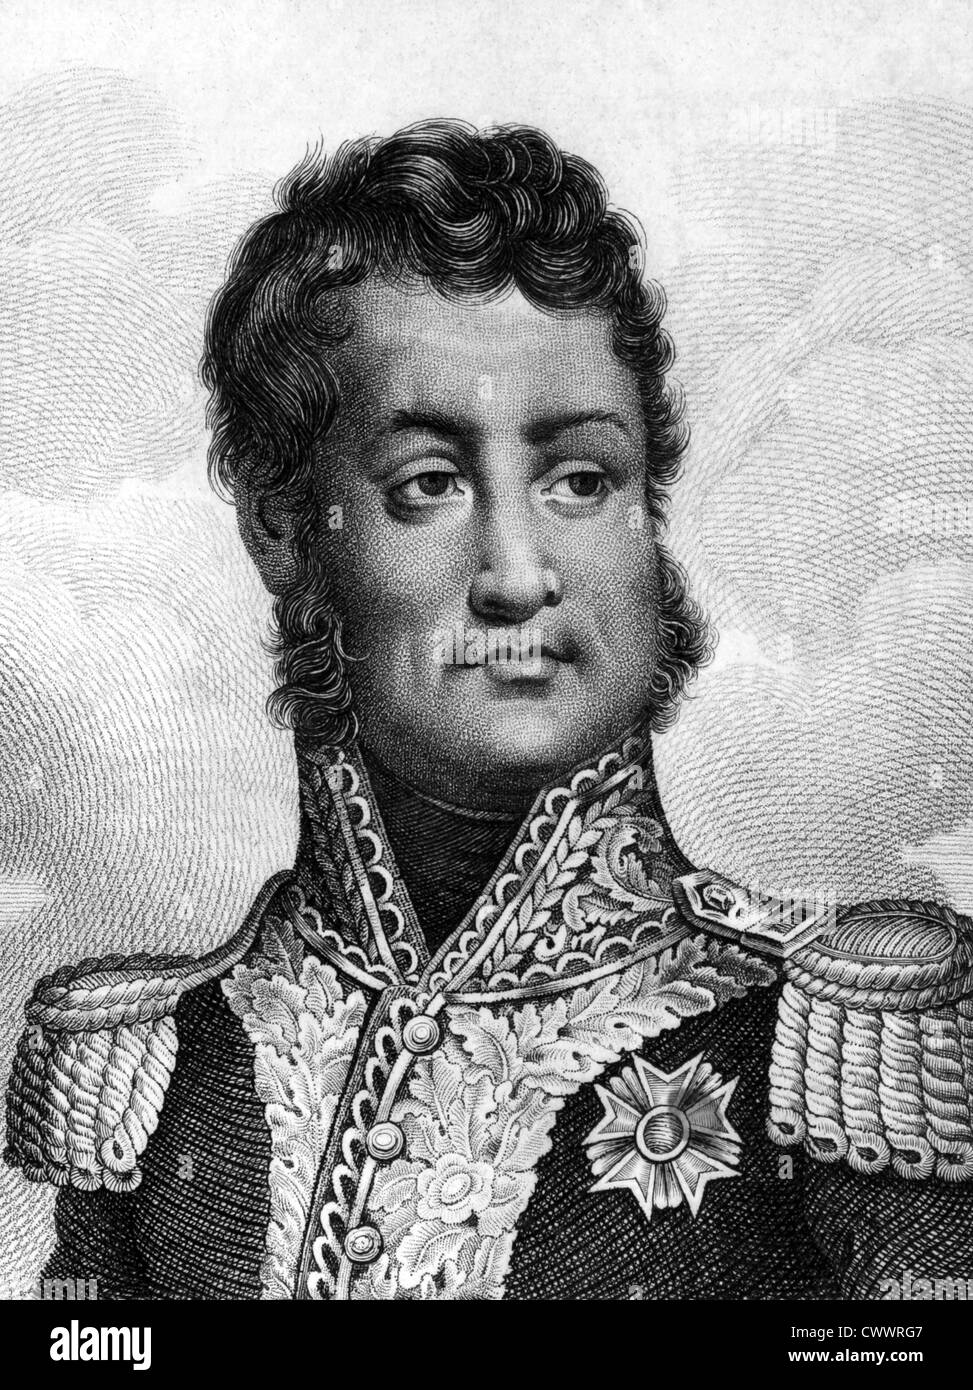 Louis Philippe I (1773-1850) On Engraving From 1859. King Of